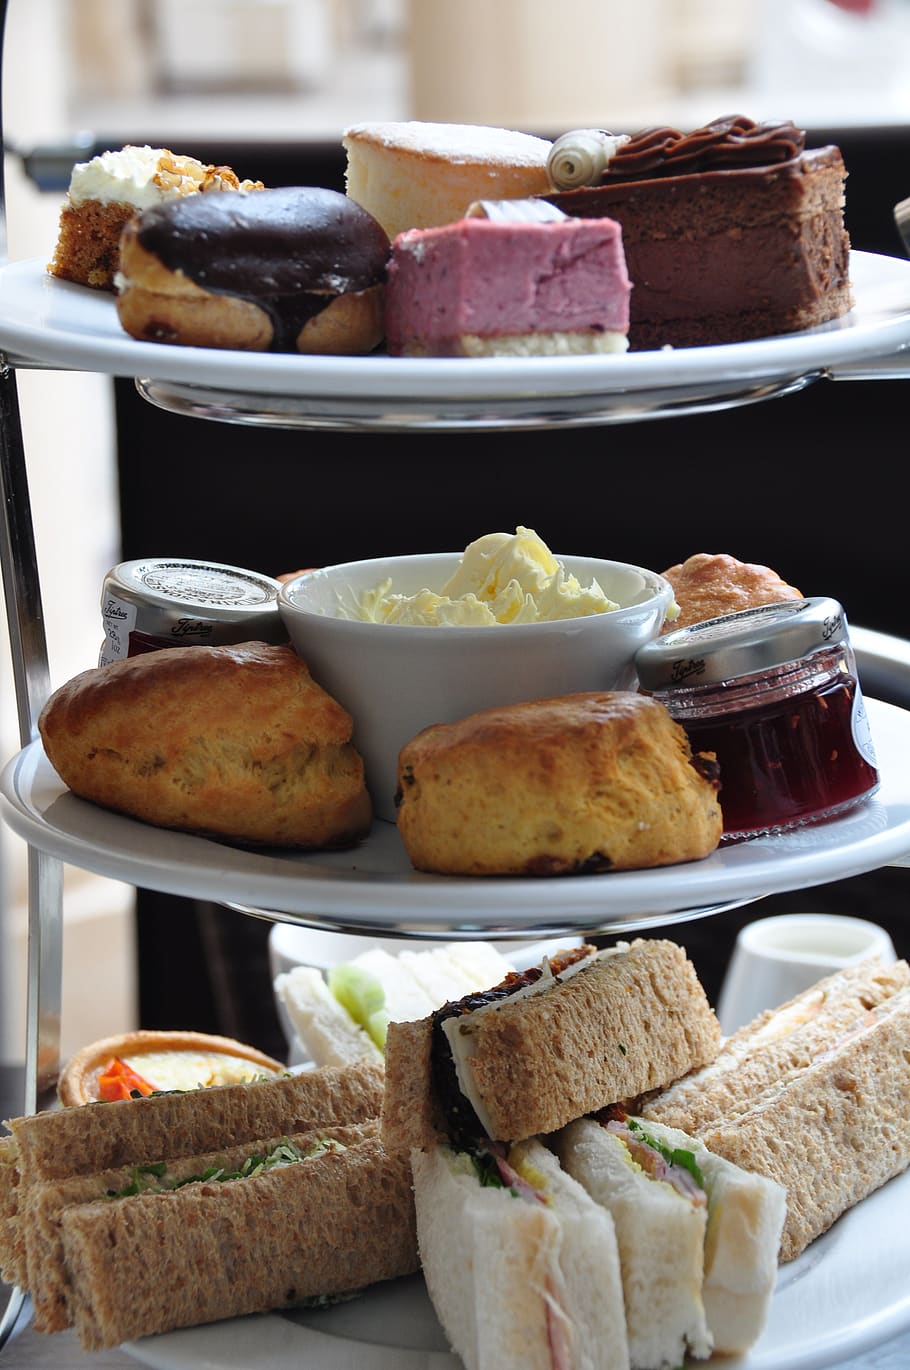 afternoon tea, cake stand, cakes, sandwiches, tea, food and drink, food, freshness, choice, ready-to-eat